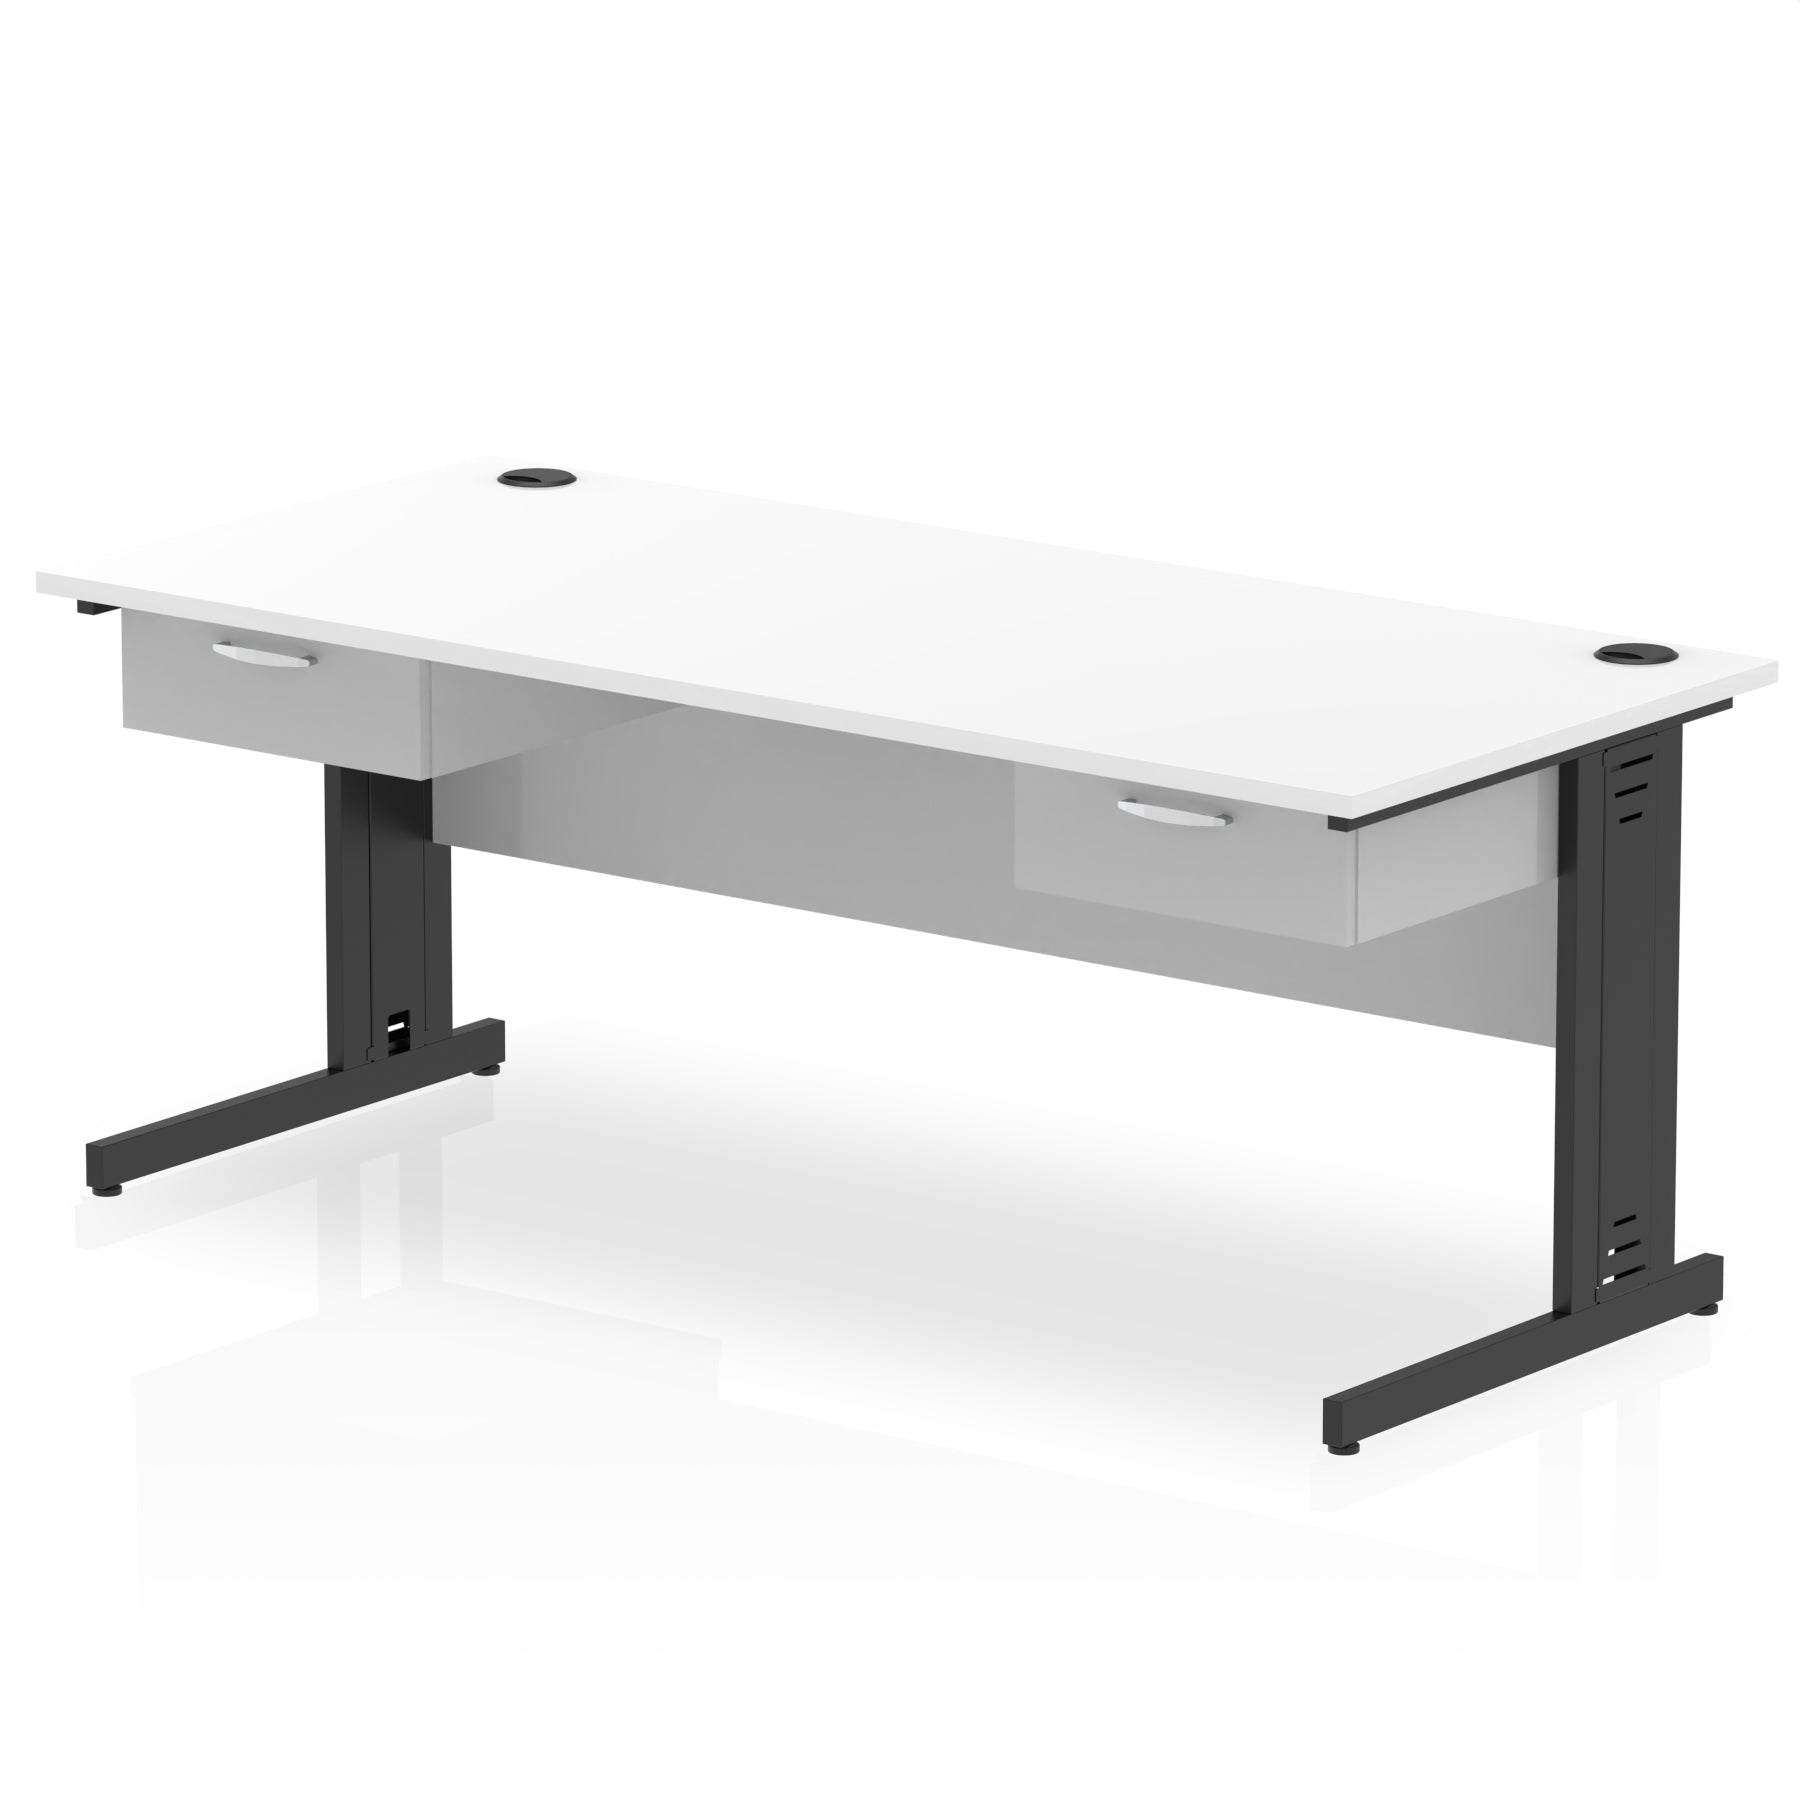 Impulse Cable Managed Straight Desk Black Frame With Two One Drawer Fixed Pedestals